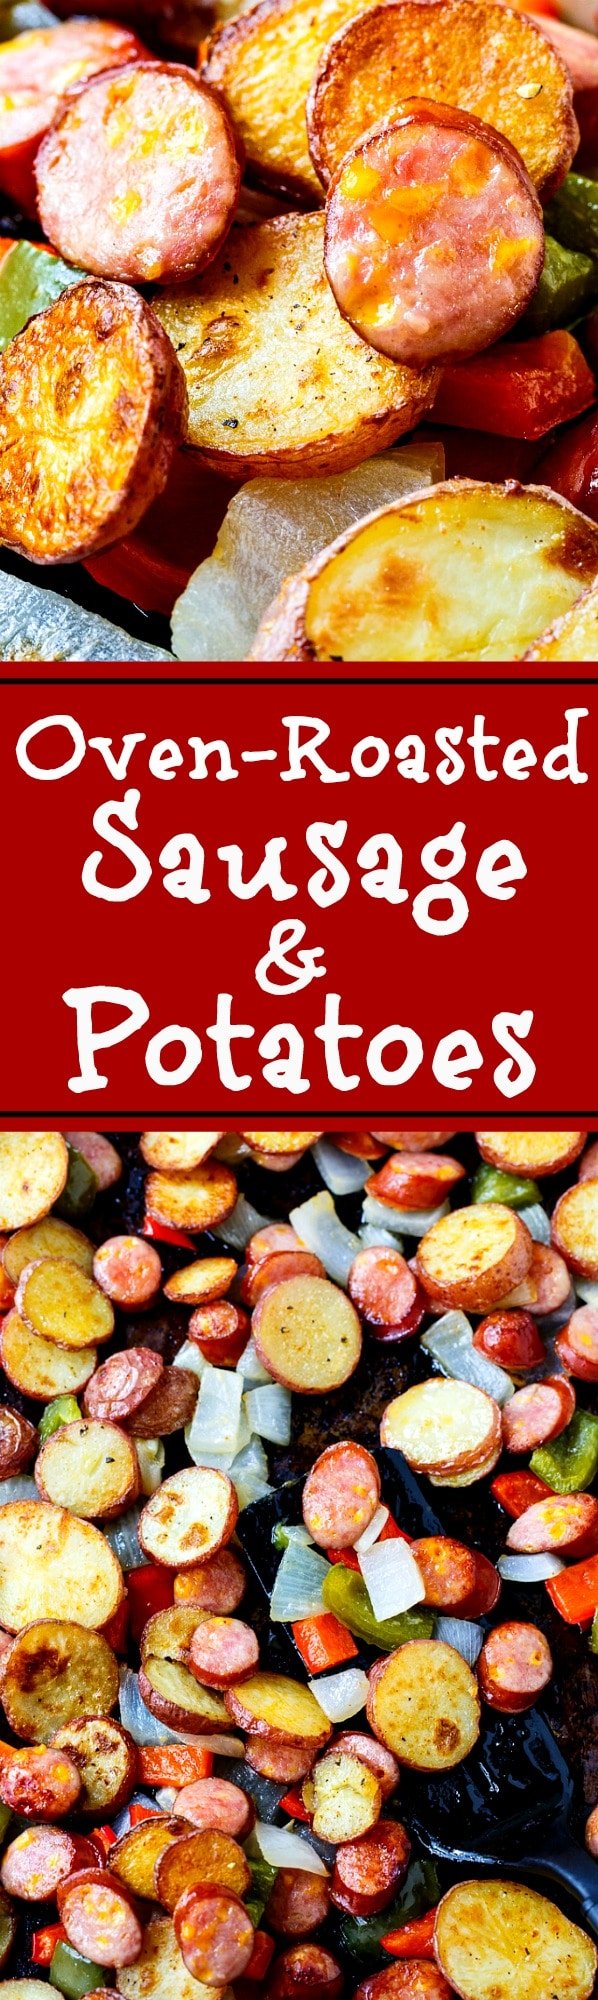 Oven Roasted Sausage and Potatoes makes a great one pan meal!